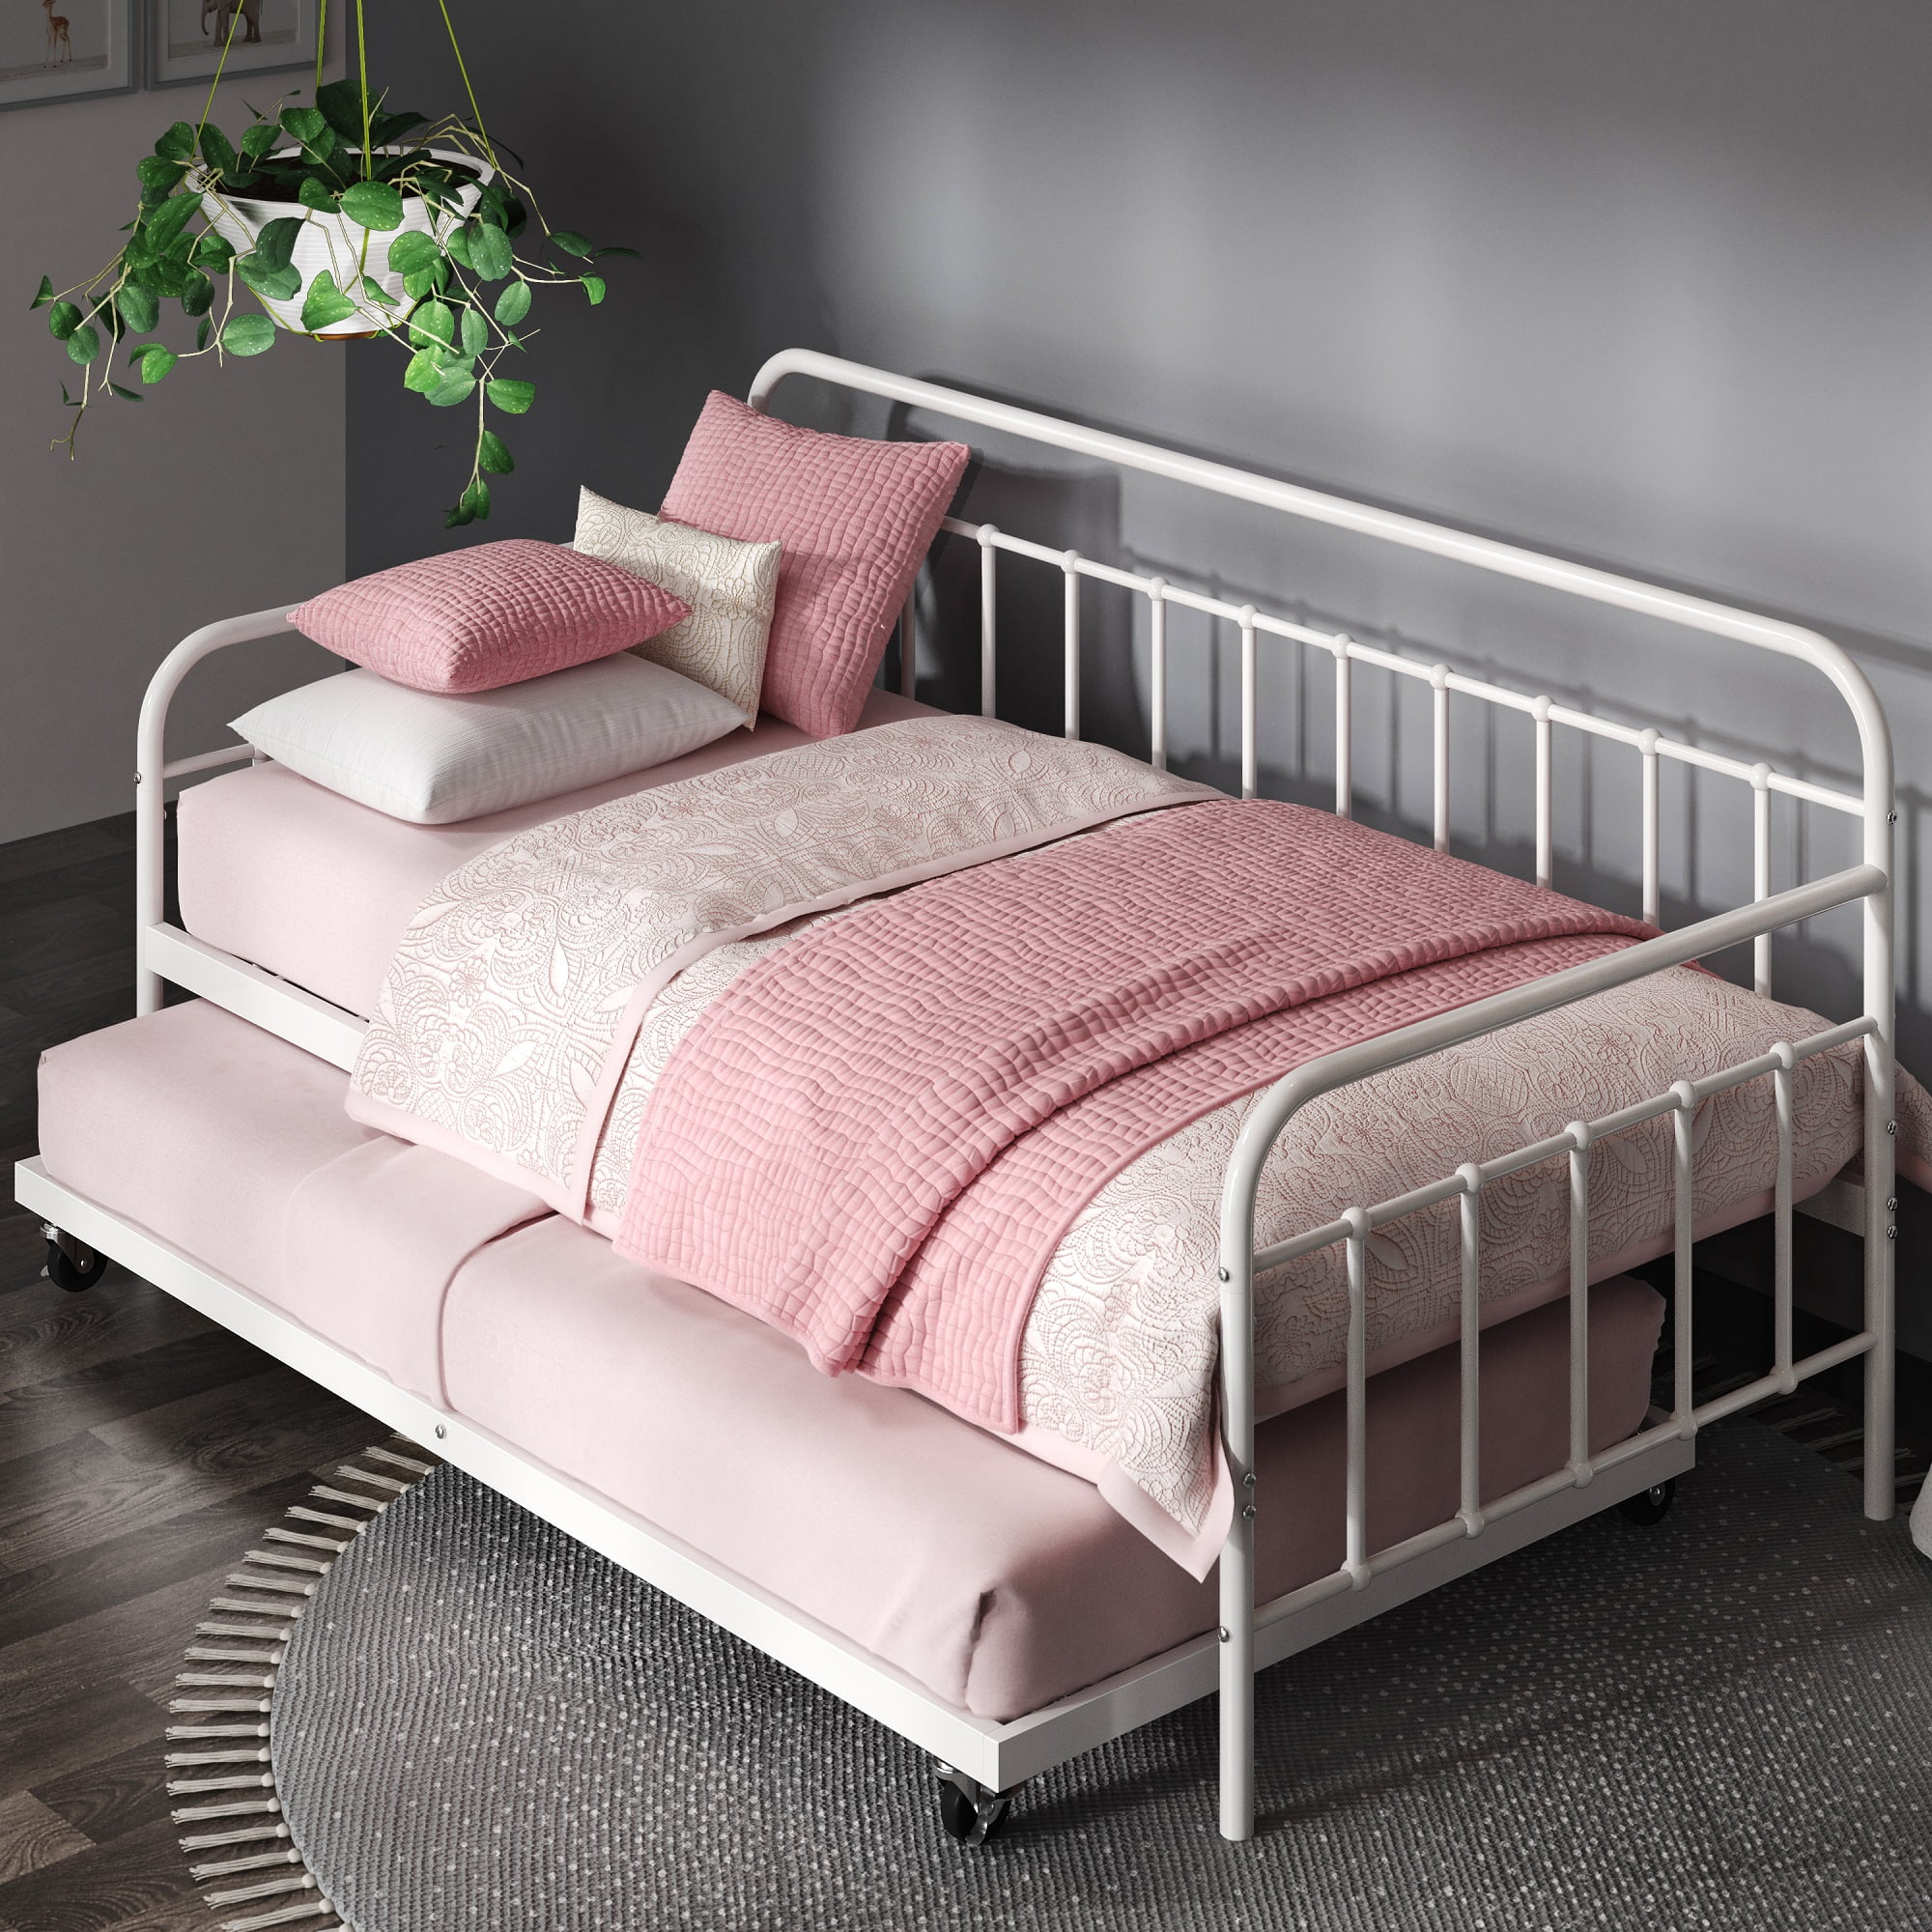 Foldable Iron Daybed Bed Frame With Headboard Premium Steel Slat Support Mattres 